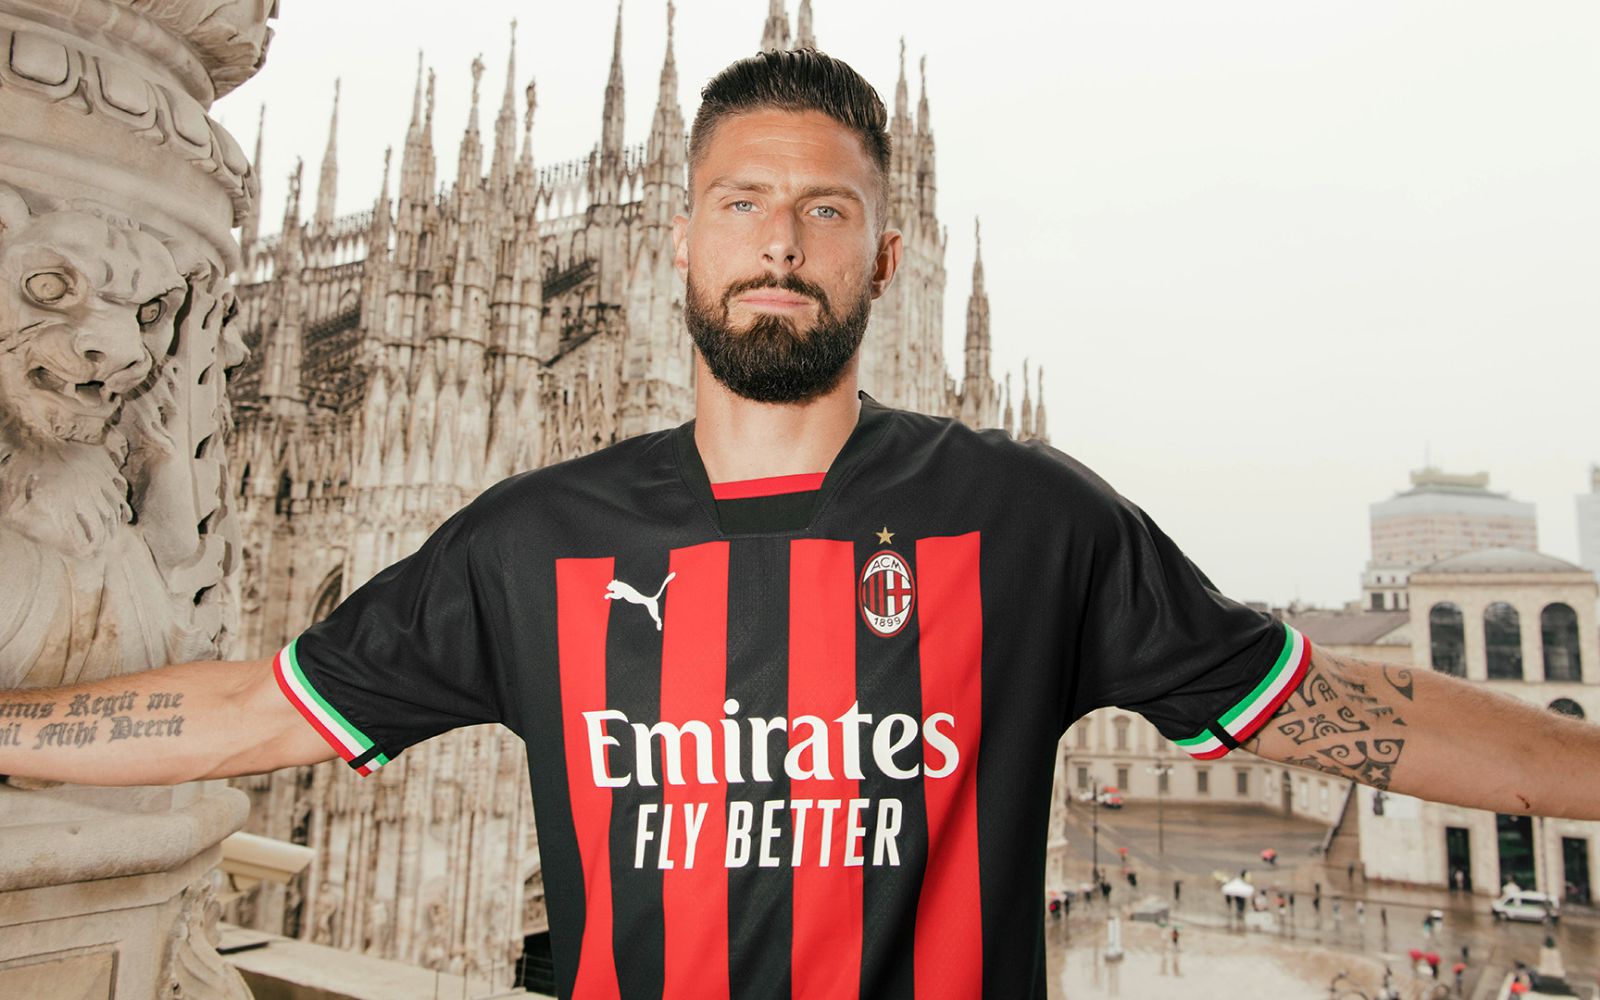 AC Milan unveiled the new jersey for the 2022/23 season signed PUMA